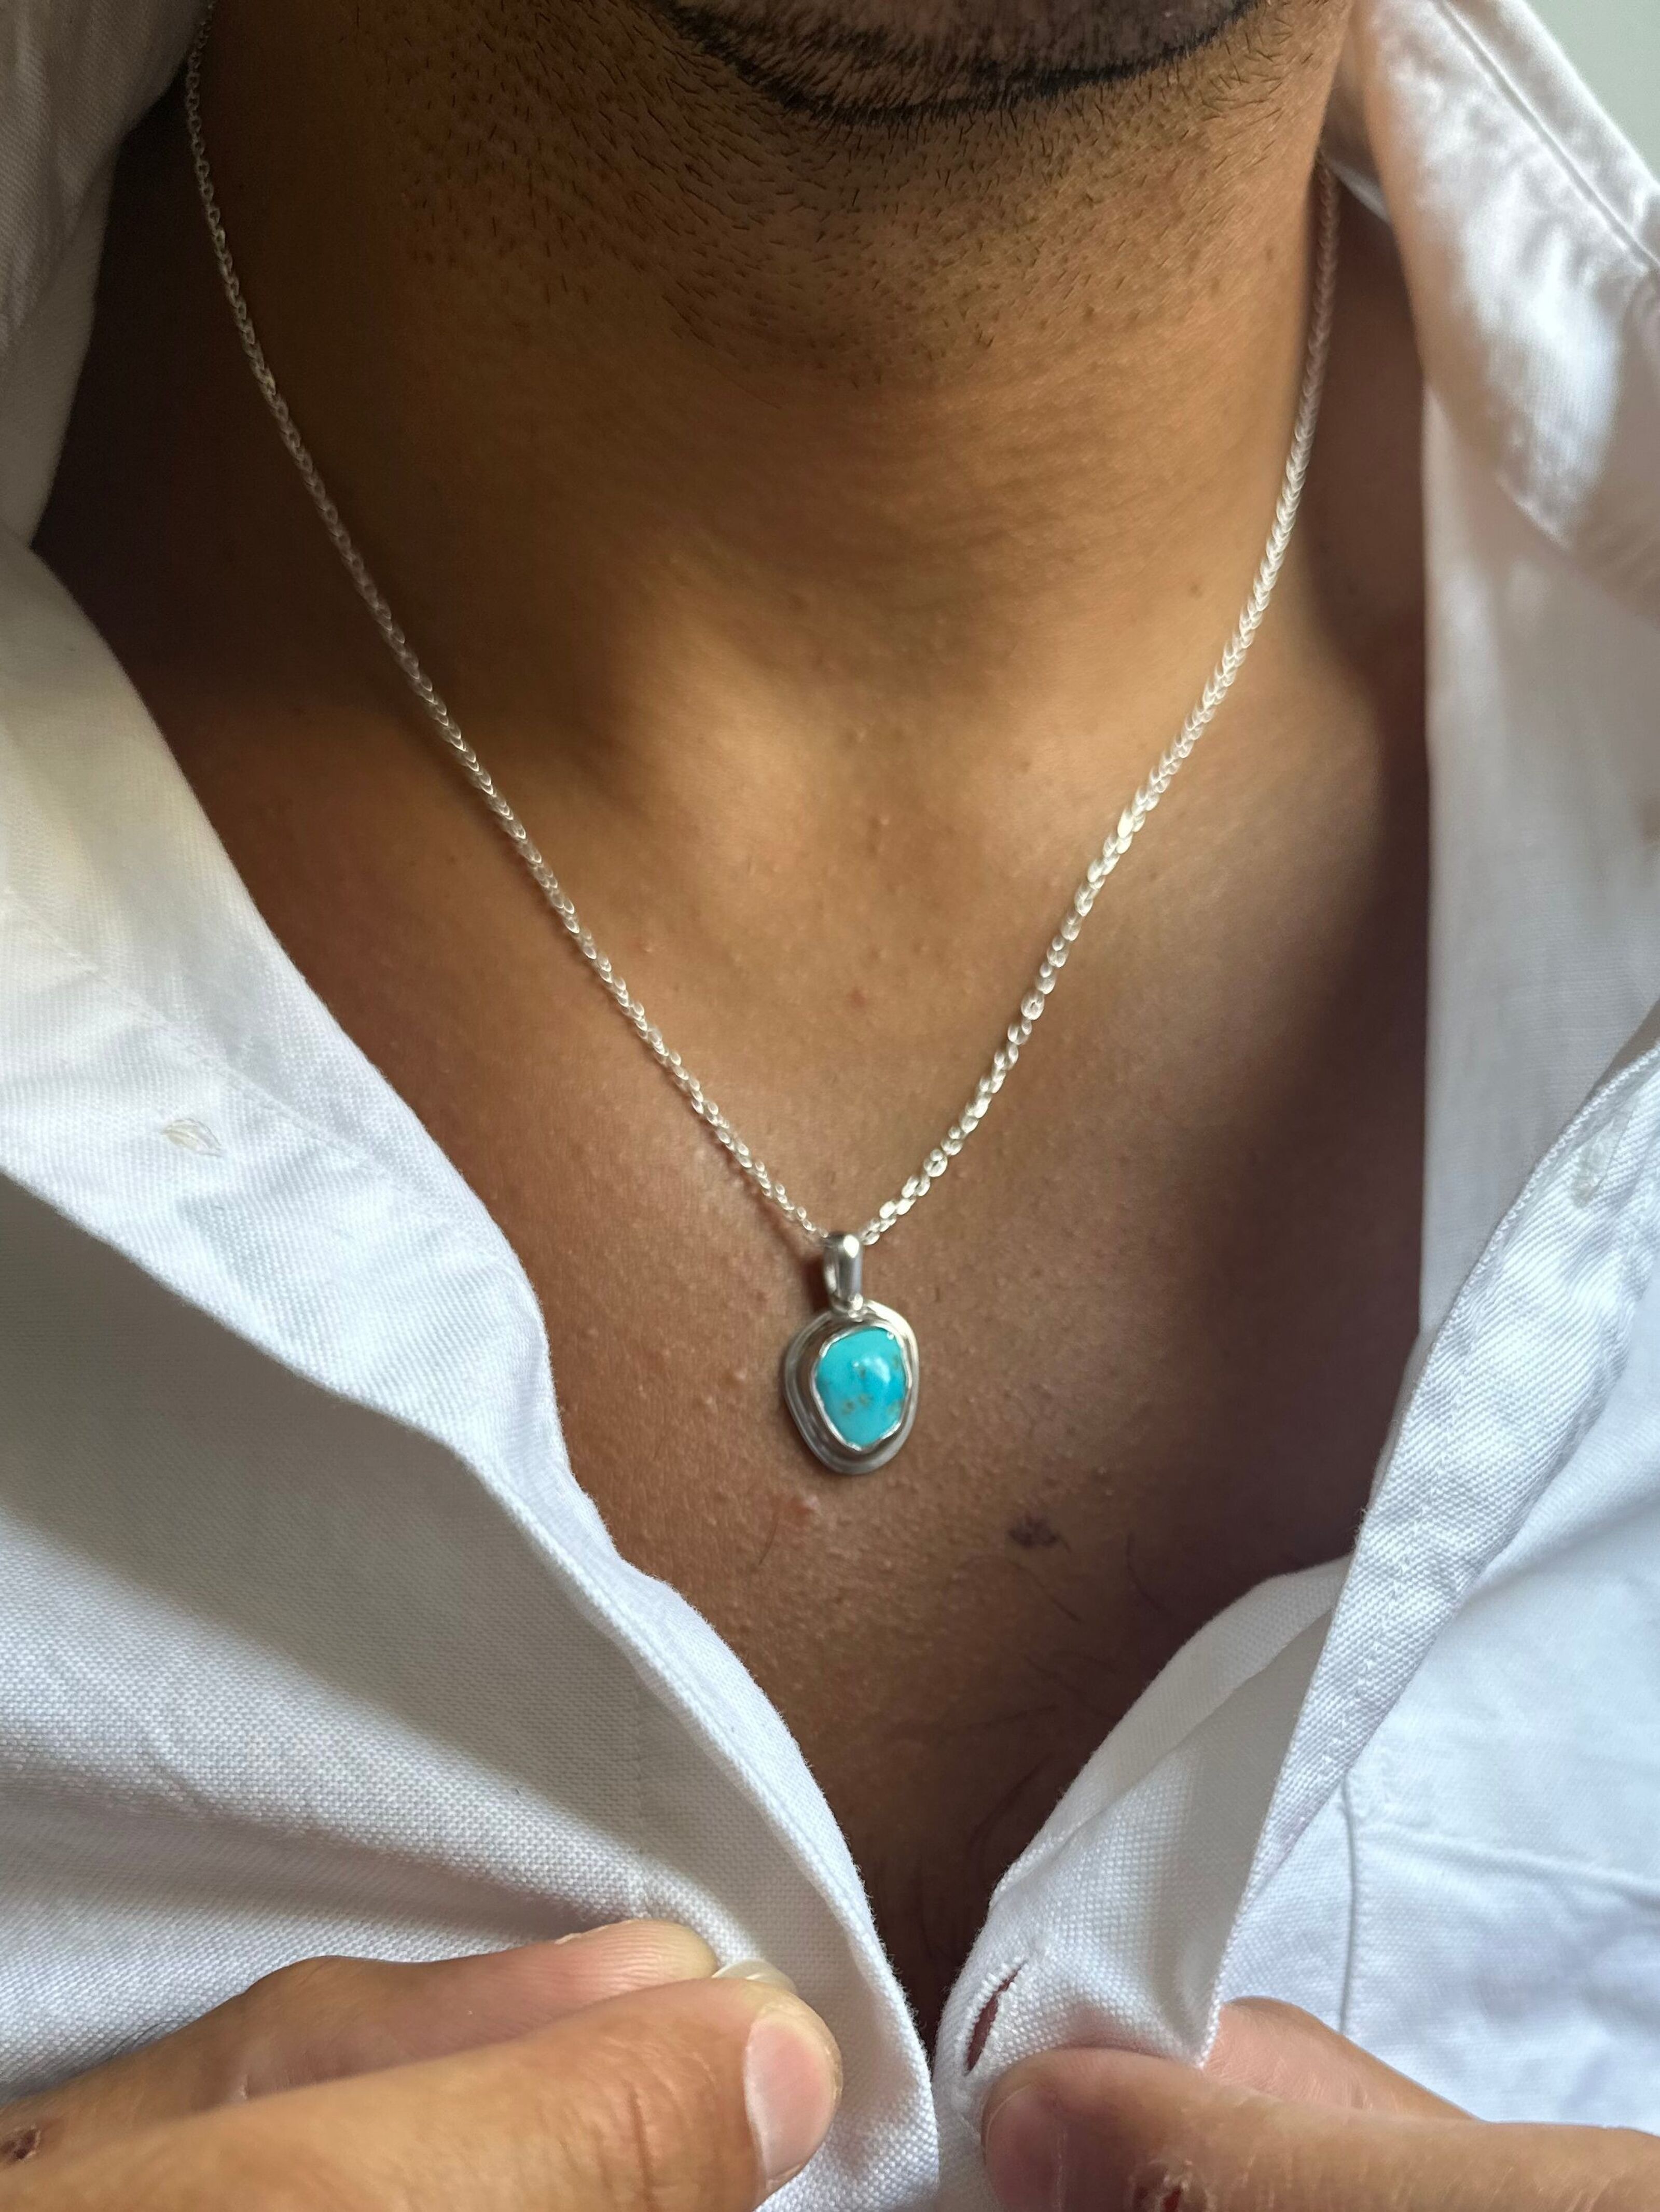 Buy wholesale Real Turquoise Stone Sterling Turquoise Necklace Necklace, Chain Men, from Men, Made Pendant, SIlver Pendant Silver Men\'s